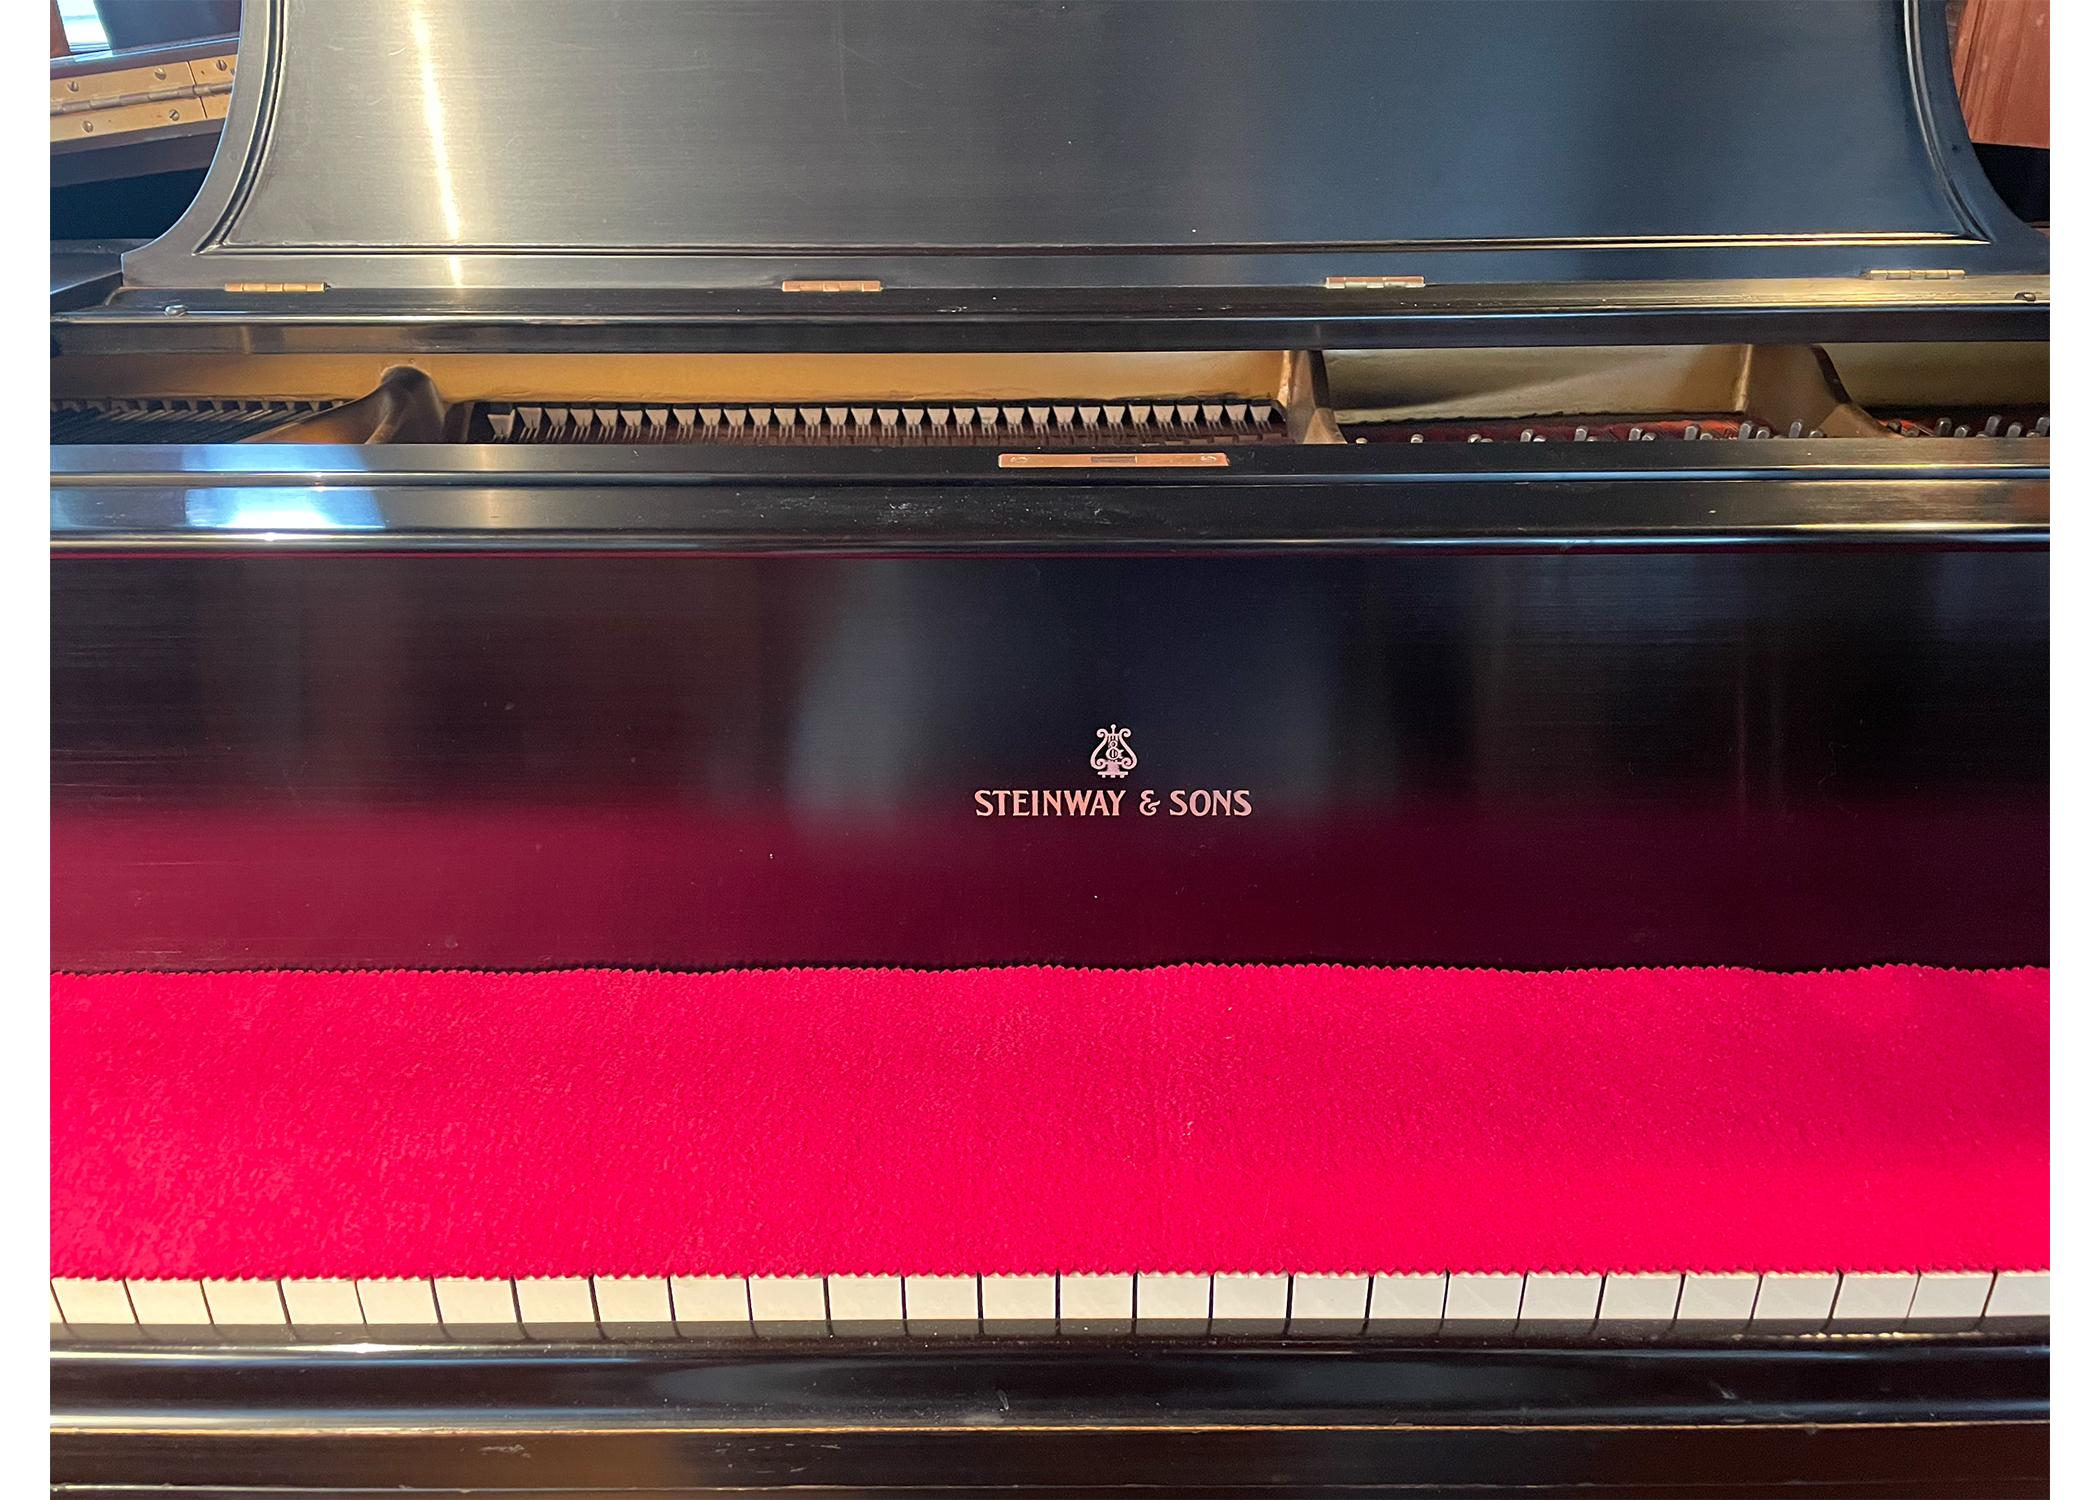 One of Steinway's Golden Age Pianos